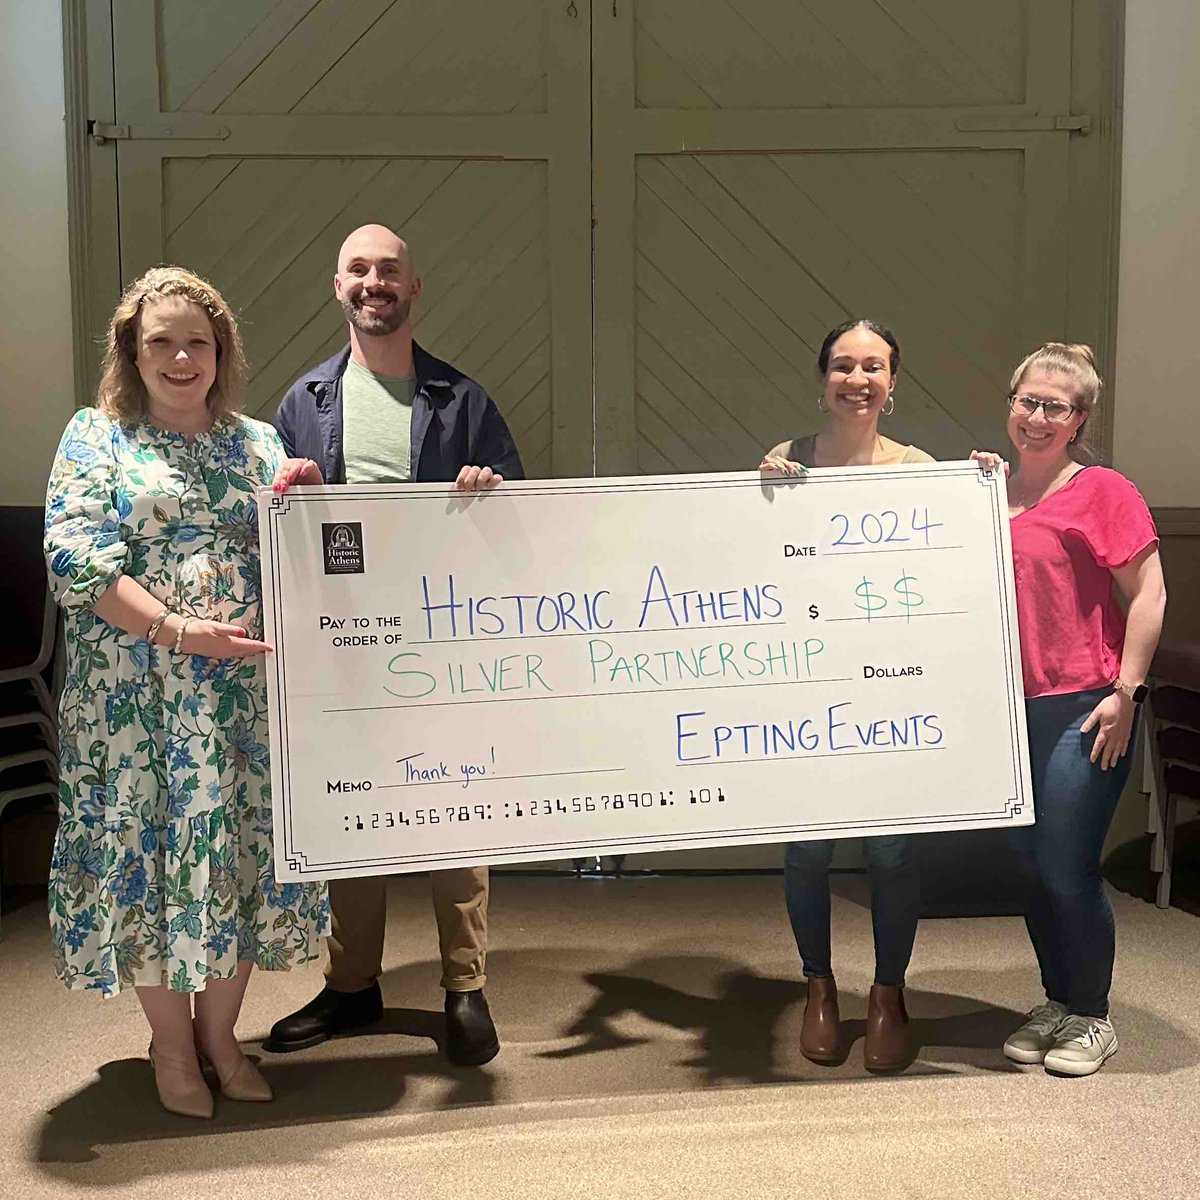 Huge shoutout and THANK YOU to our Silver Partner 🥈, Epting Events. The folks behind Epting Events have been some of Historic Athens’ biggest champions, and we’re incredibly grateful for their unwavering support. Want to help preserve Athens? Join us! historicathens.com/partner